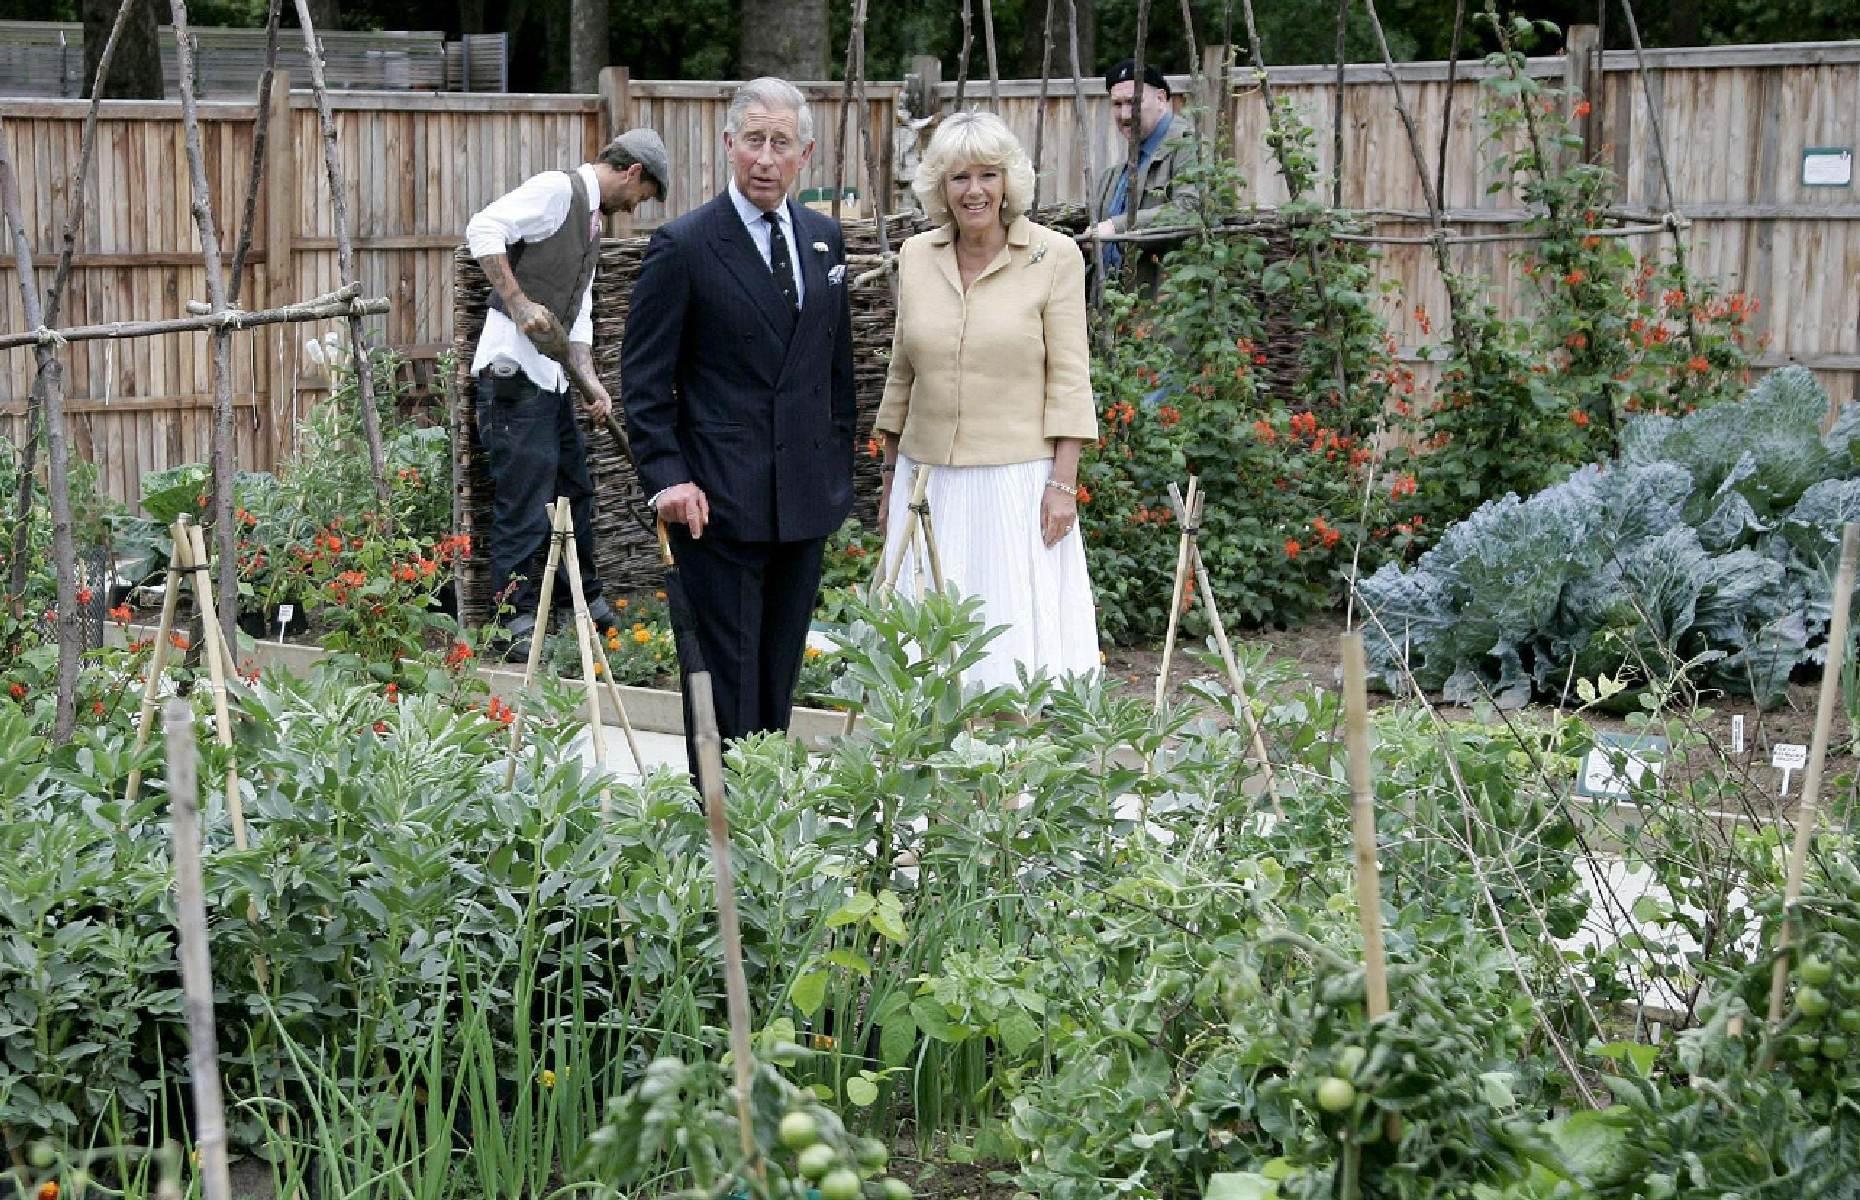 <p>Queen Camilla revealed that her and King Charles enjoy growing their own produce including broccoli, carrots and courgettes, adding: "I love the vegetable garden, and summer in particular. I’m very proud of my white peaches. My husband is an excellent gardener, and we’re quite competitive about our fruit and vegetables." The King has had his own 'garden kitchen' since 1985, calling gardening 'the most therapeutic business'.</p>